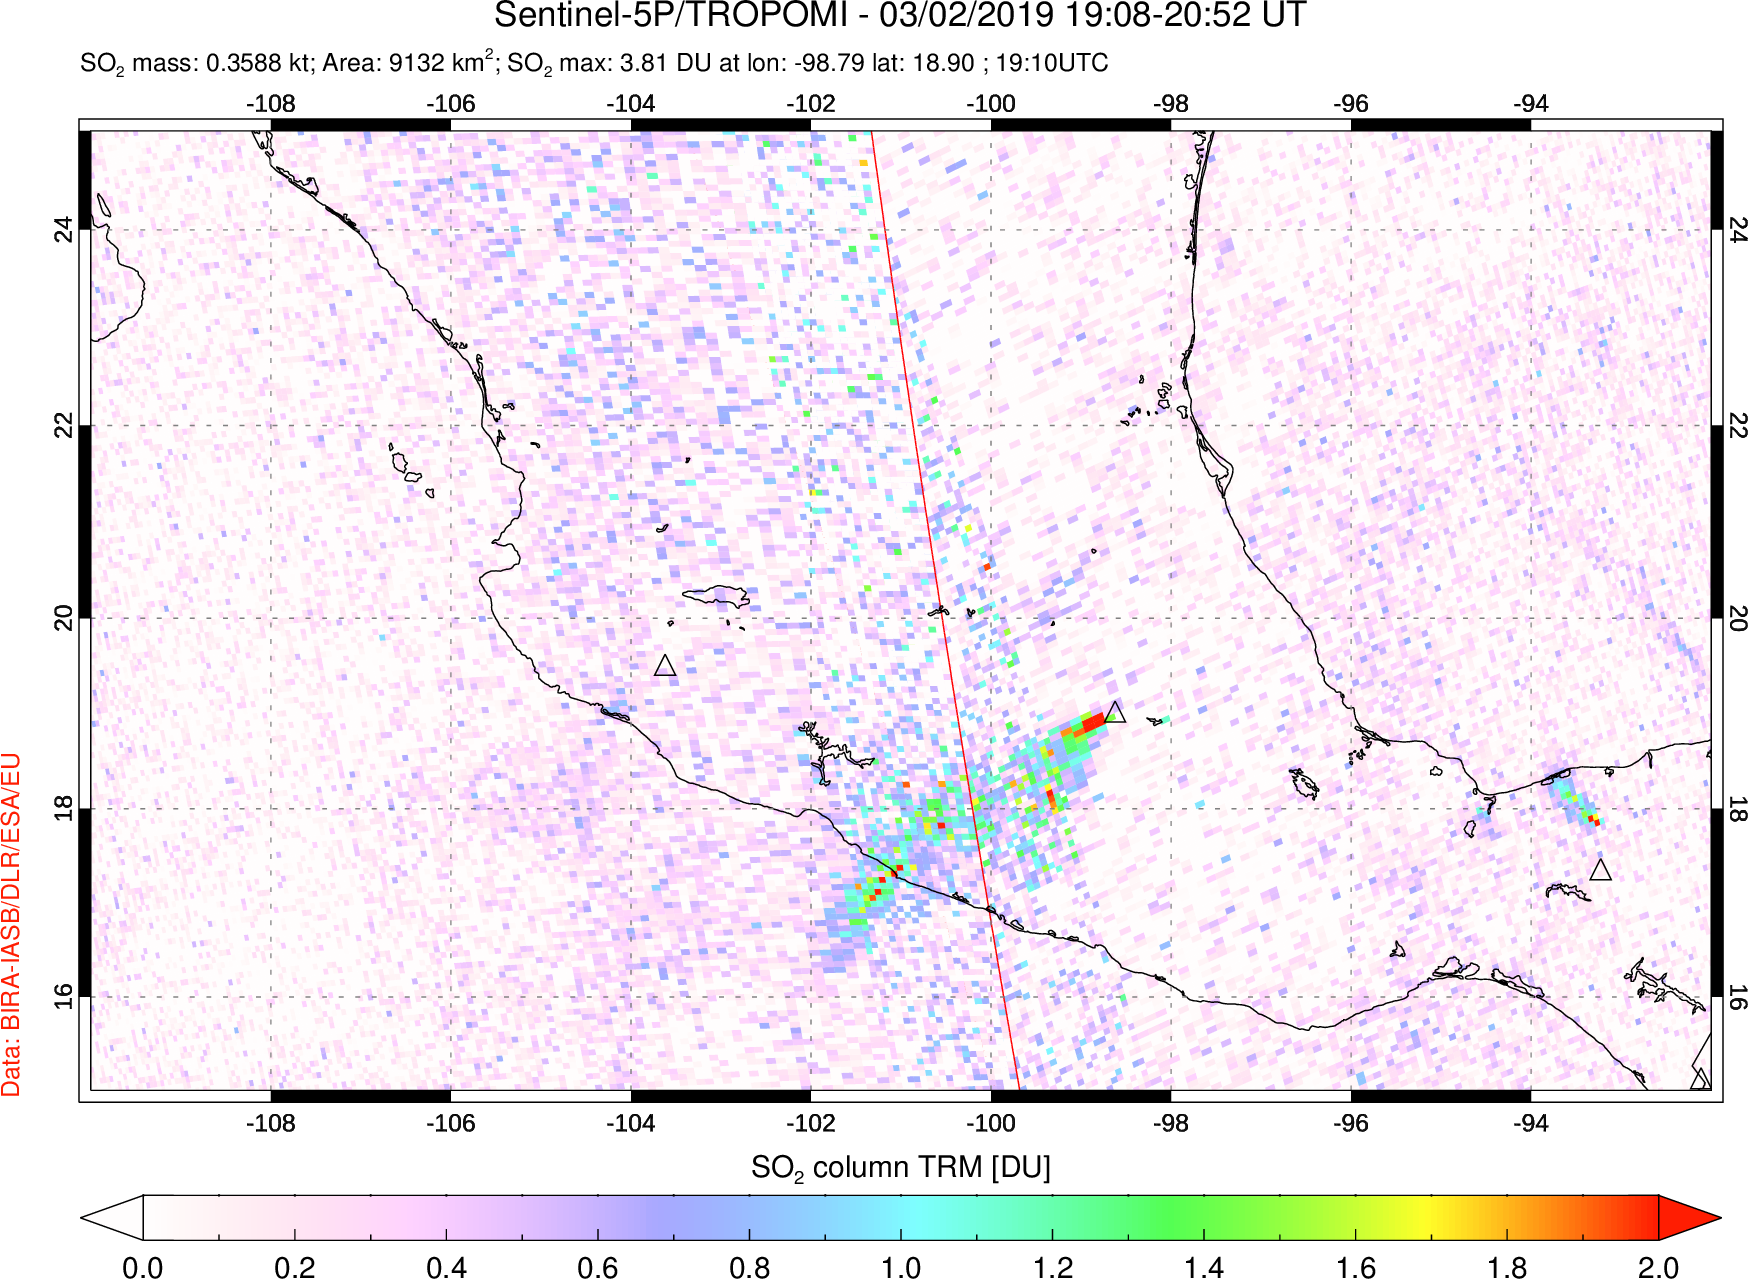 A sulfur dioxide image over Mexico on Mar 02, 2019.